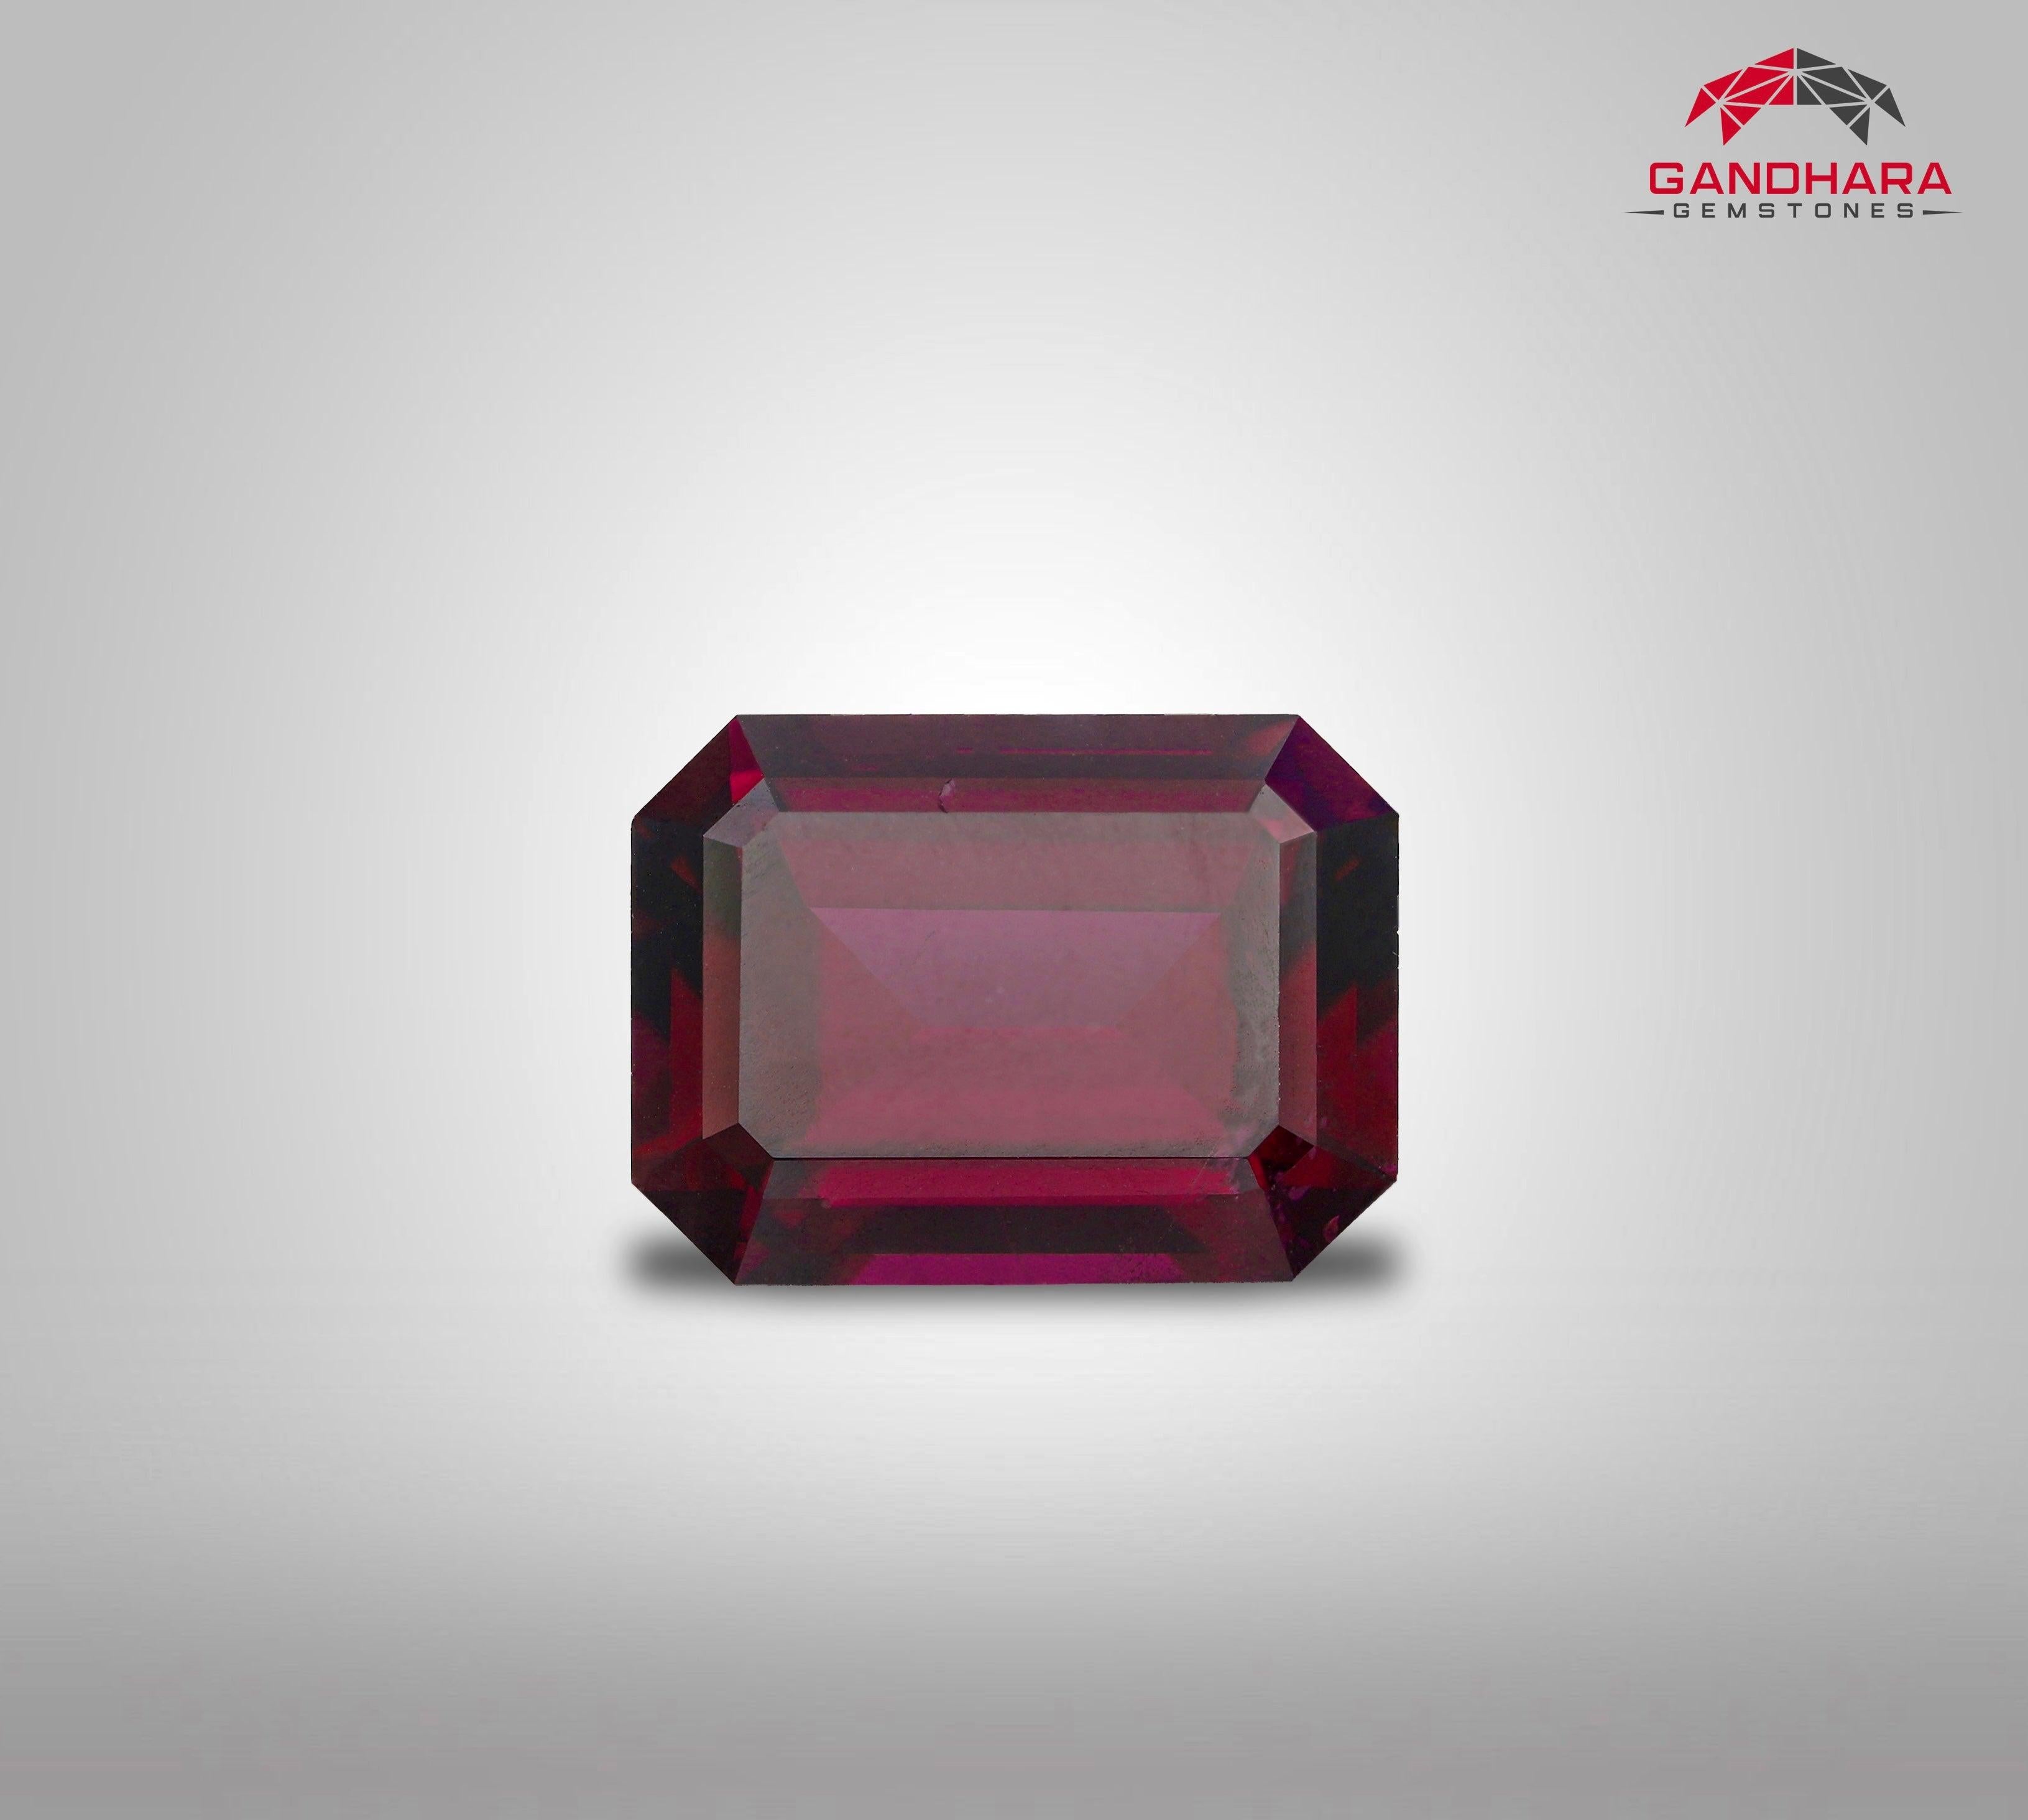 Dazzling Malawi Garnet Gemstone , available for sale at wholesale price, Flawless loupe clean clarity, emerald cut, Rectangular shape 4.95 carats loose certified Garnet from malawi.

Product Information:
GEMSTONE TYPE	Dazzling Malawi Garnet